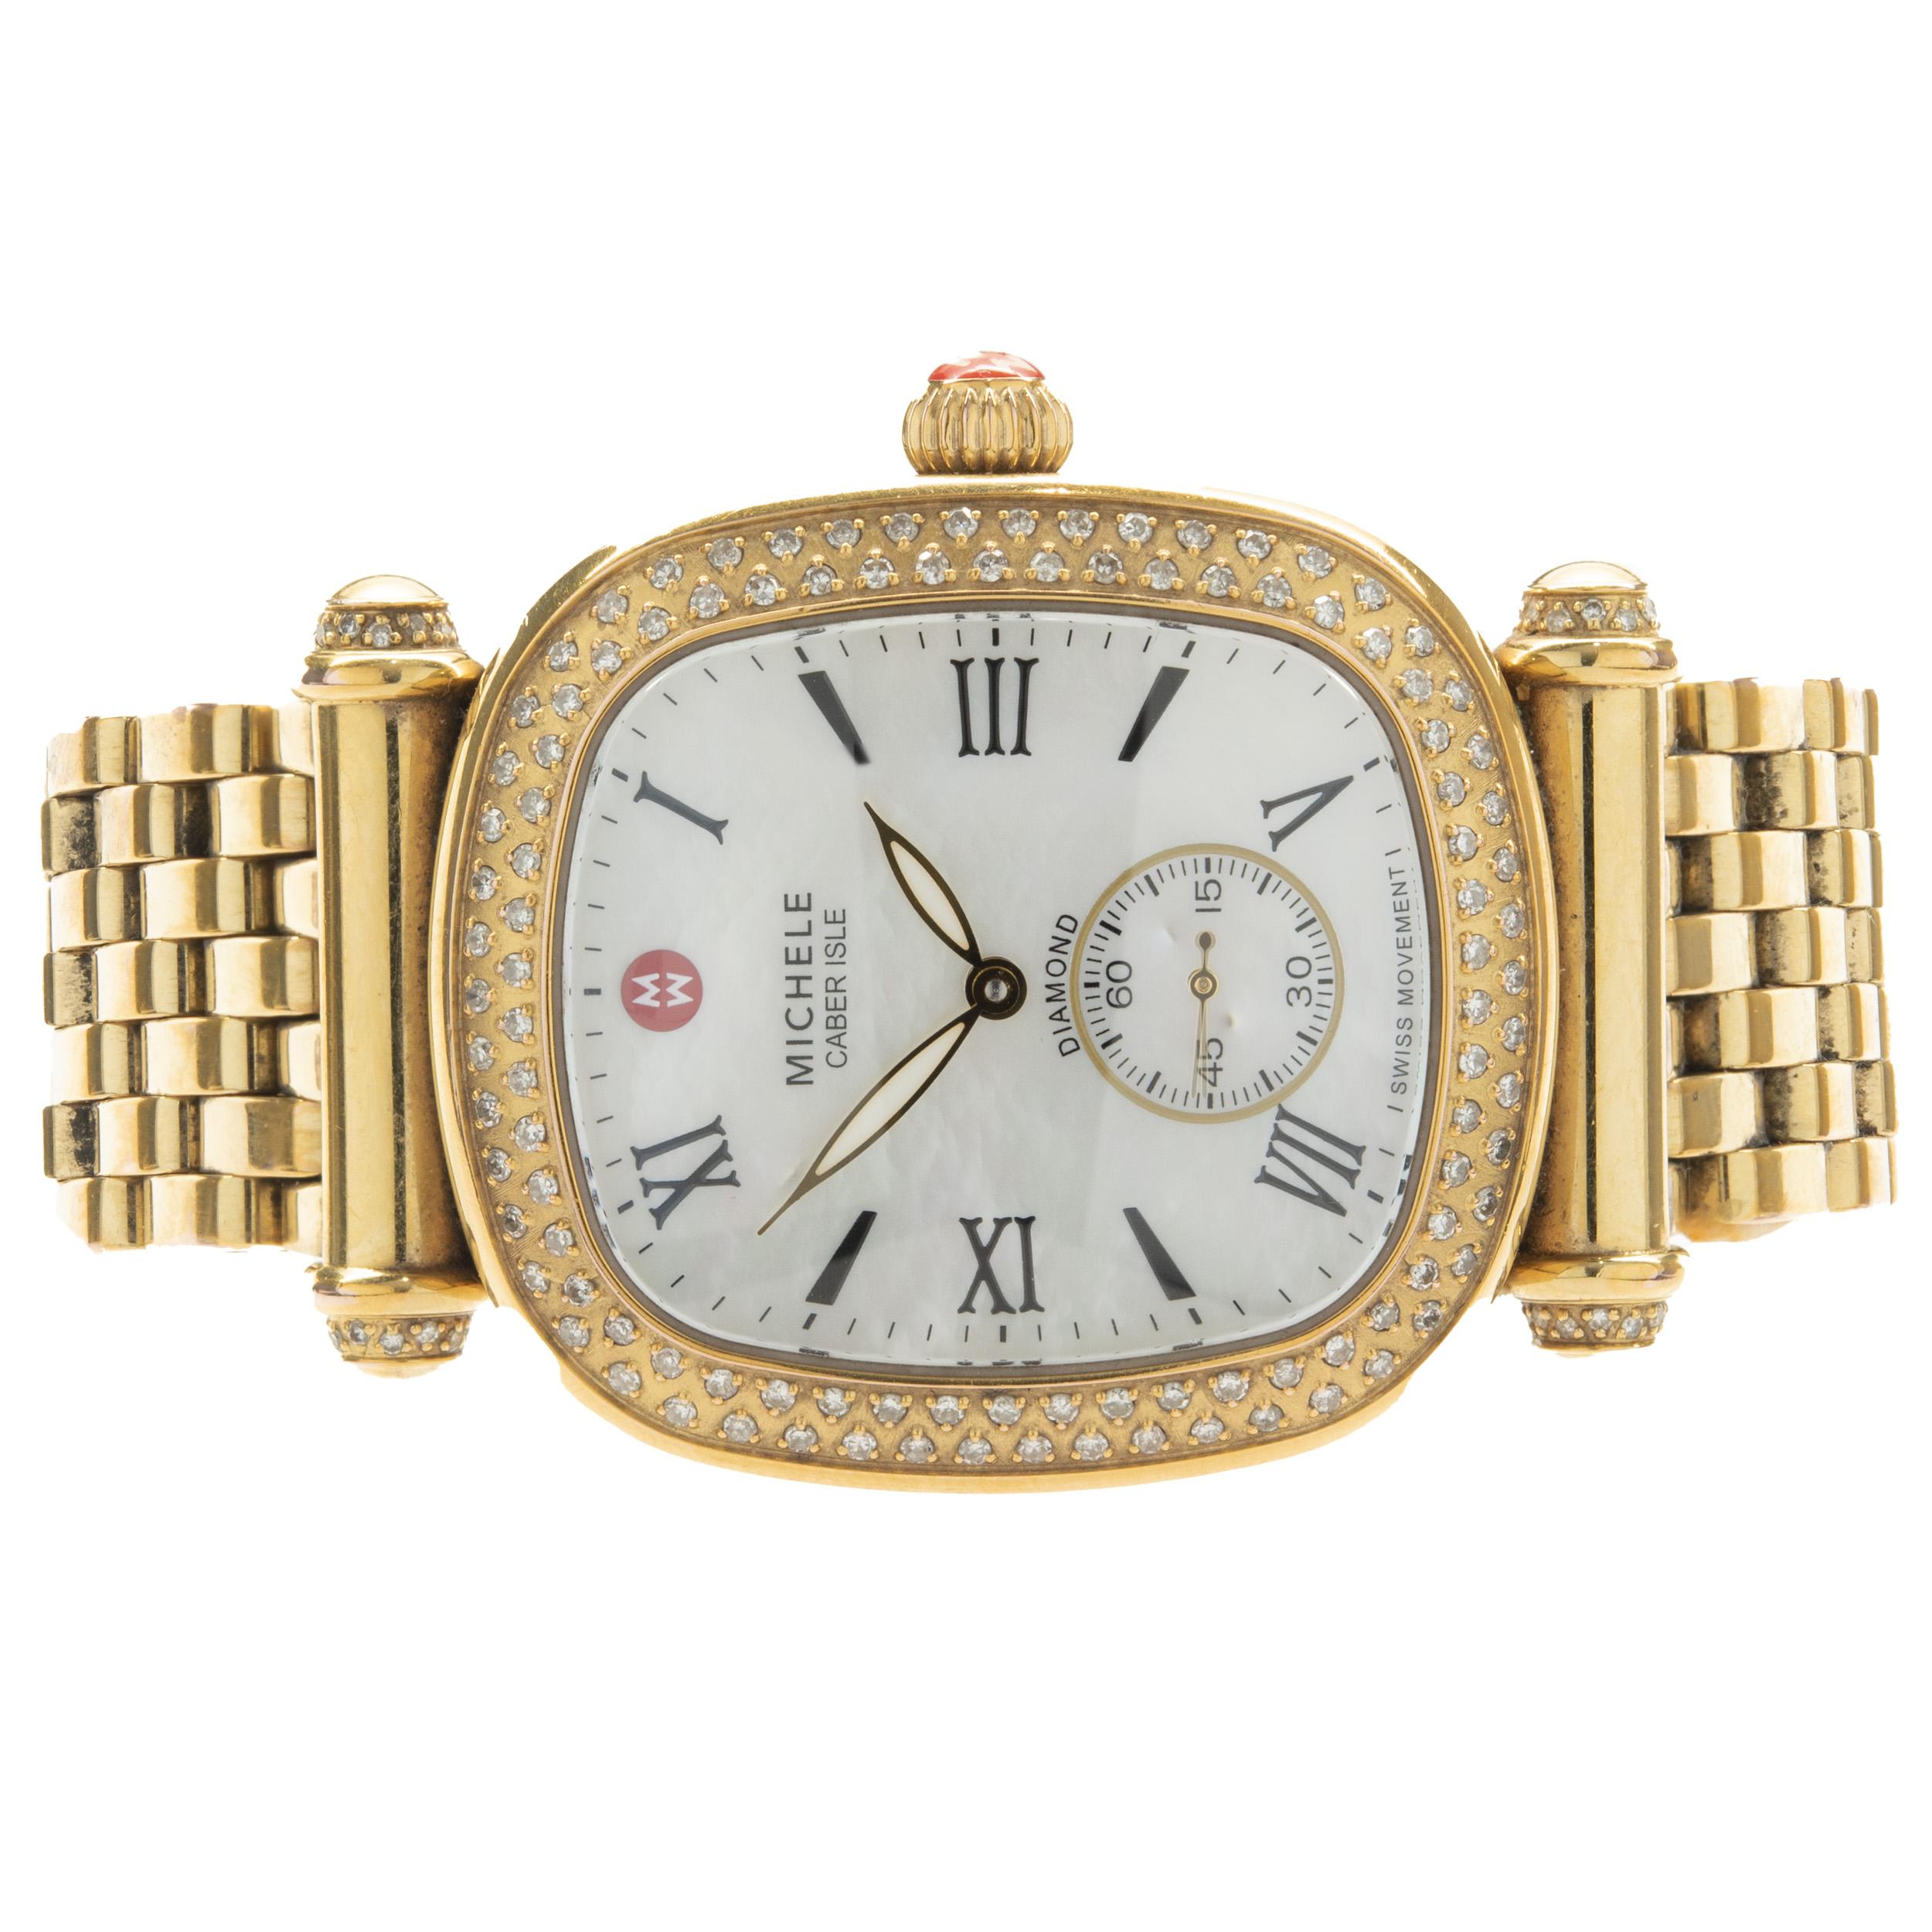 Movement: quartz
Function: hours, minutes, seconds 
Case: 36x32mm stainless gold plated oval case, diamond bezel, sapphire crystal
Dial: mother of pearl roman dial
Band: Michele stainless steel gold plated mesh bracelet, deployment clasp
Serial #: